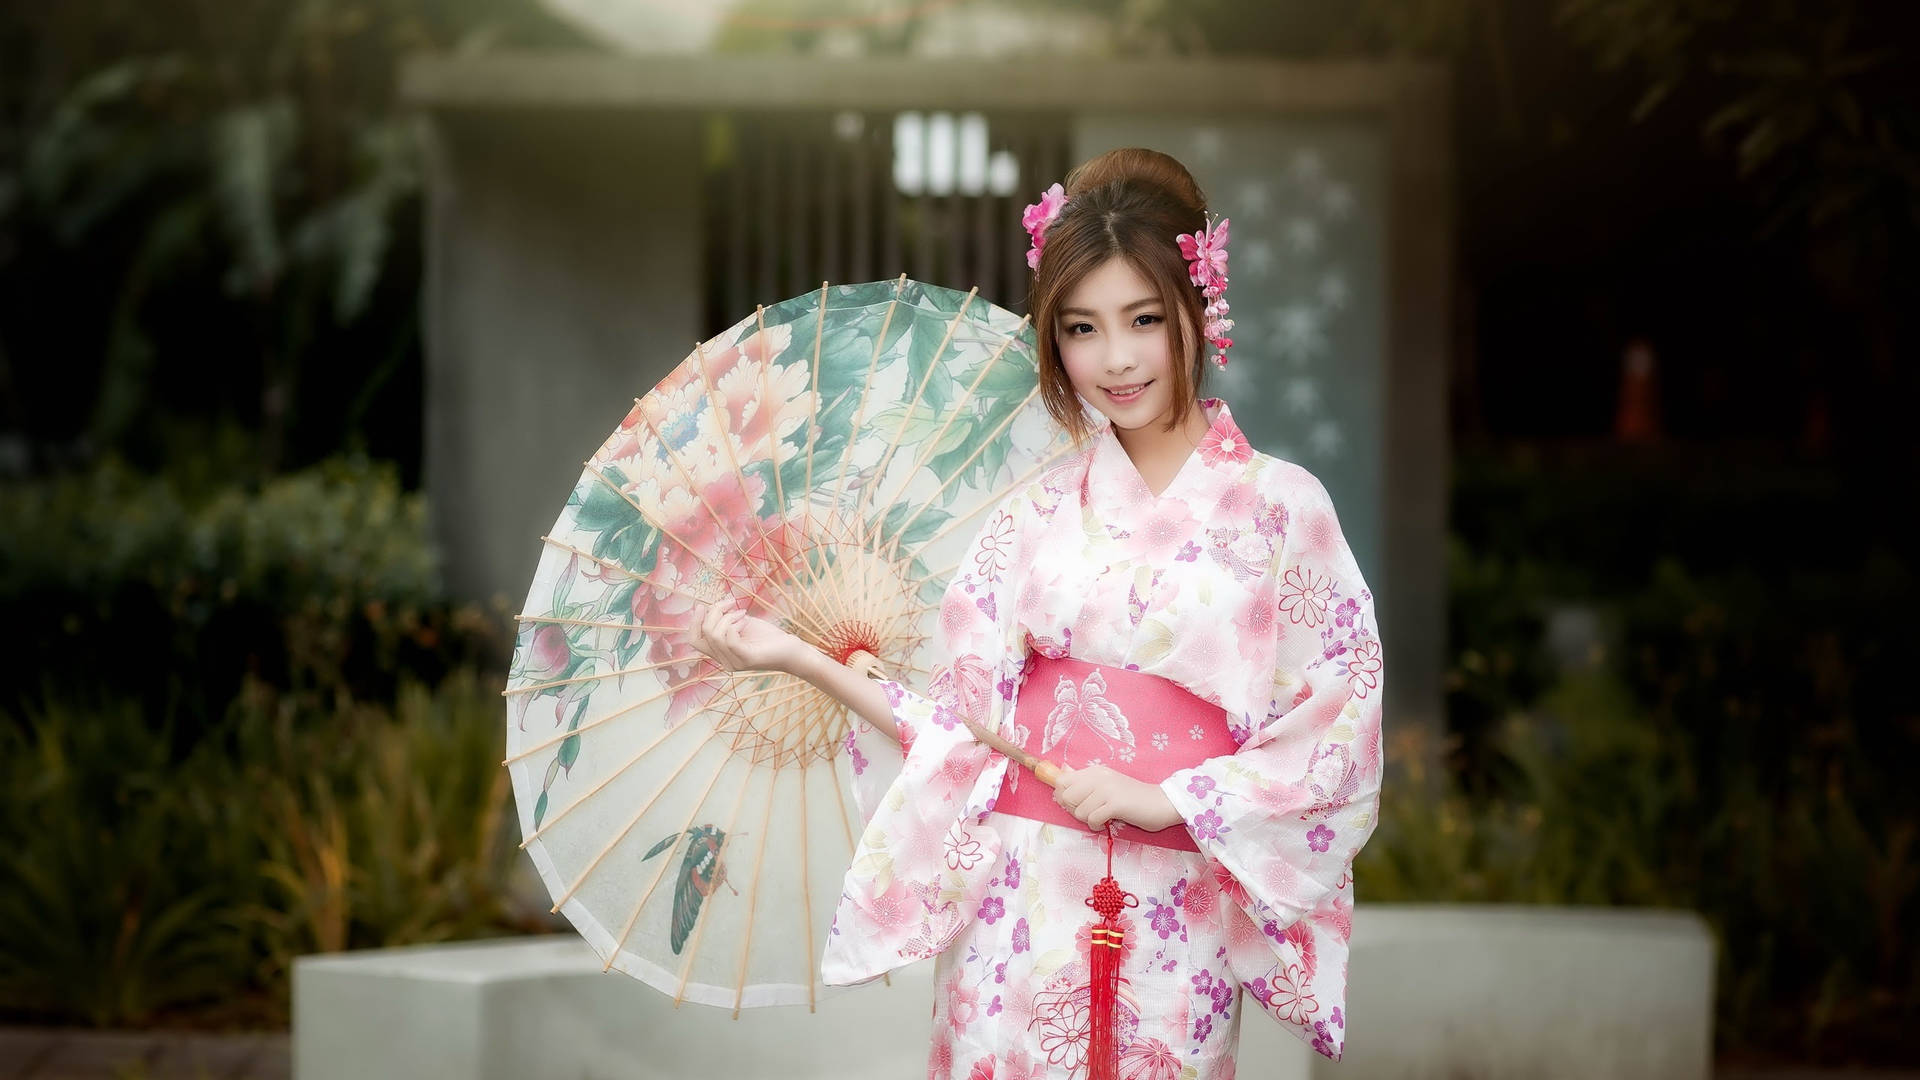 Japanese Girl With Floral Parasol Wallpaper